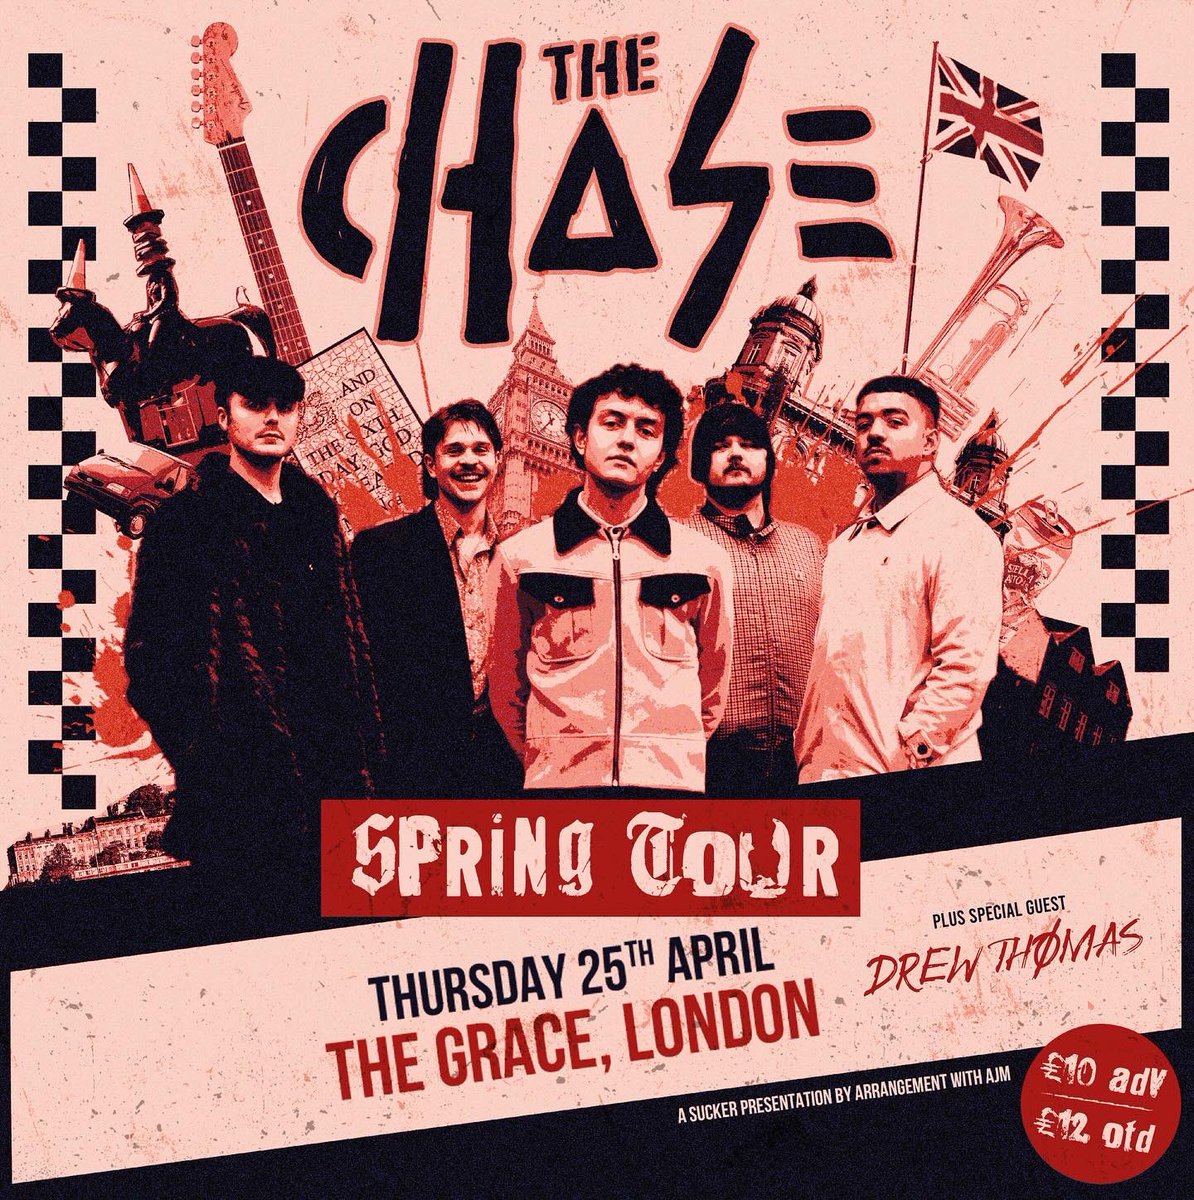 London! I’m supporting The Chase in London next month with my full band 💥 Tickets here: fatsoma.com/e/fng11ez8/the… ✌🏼